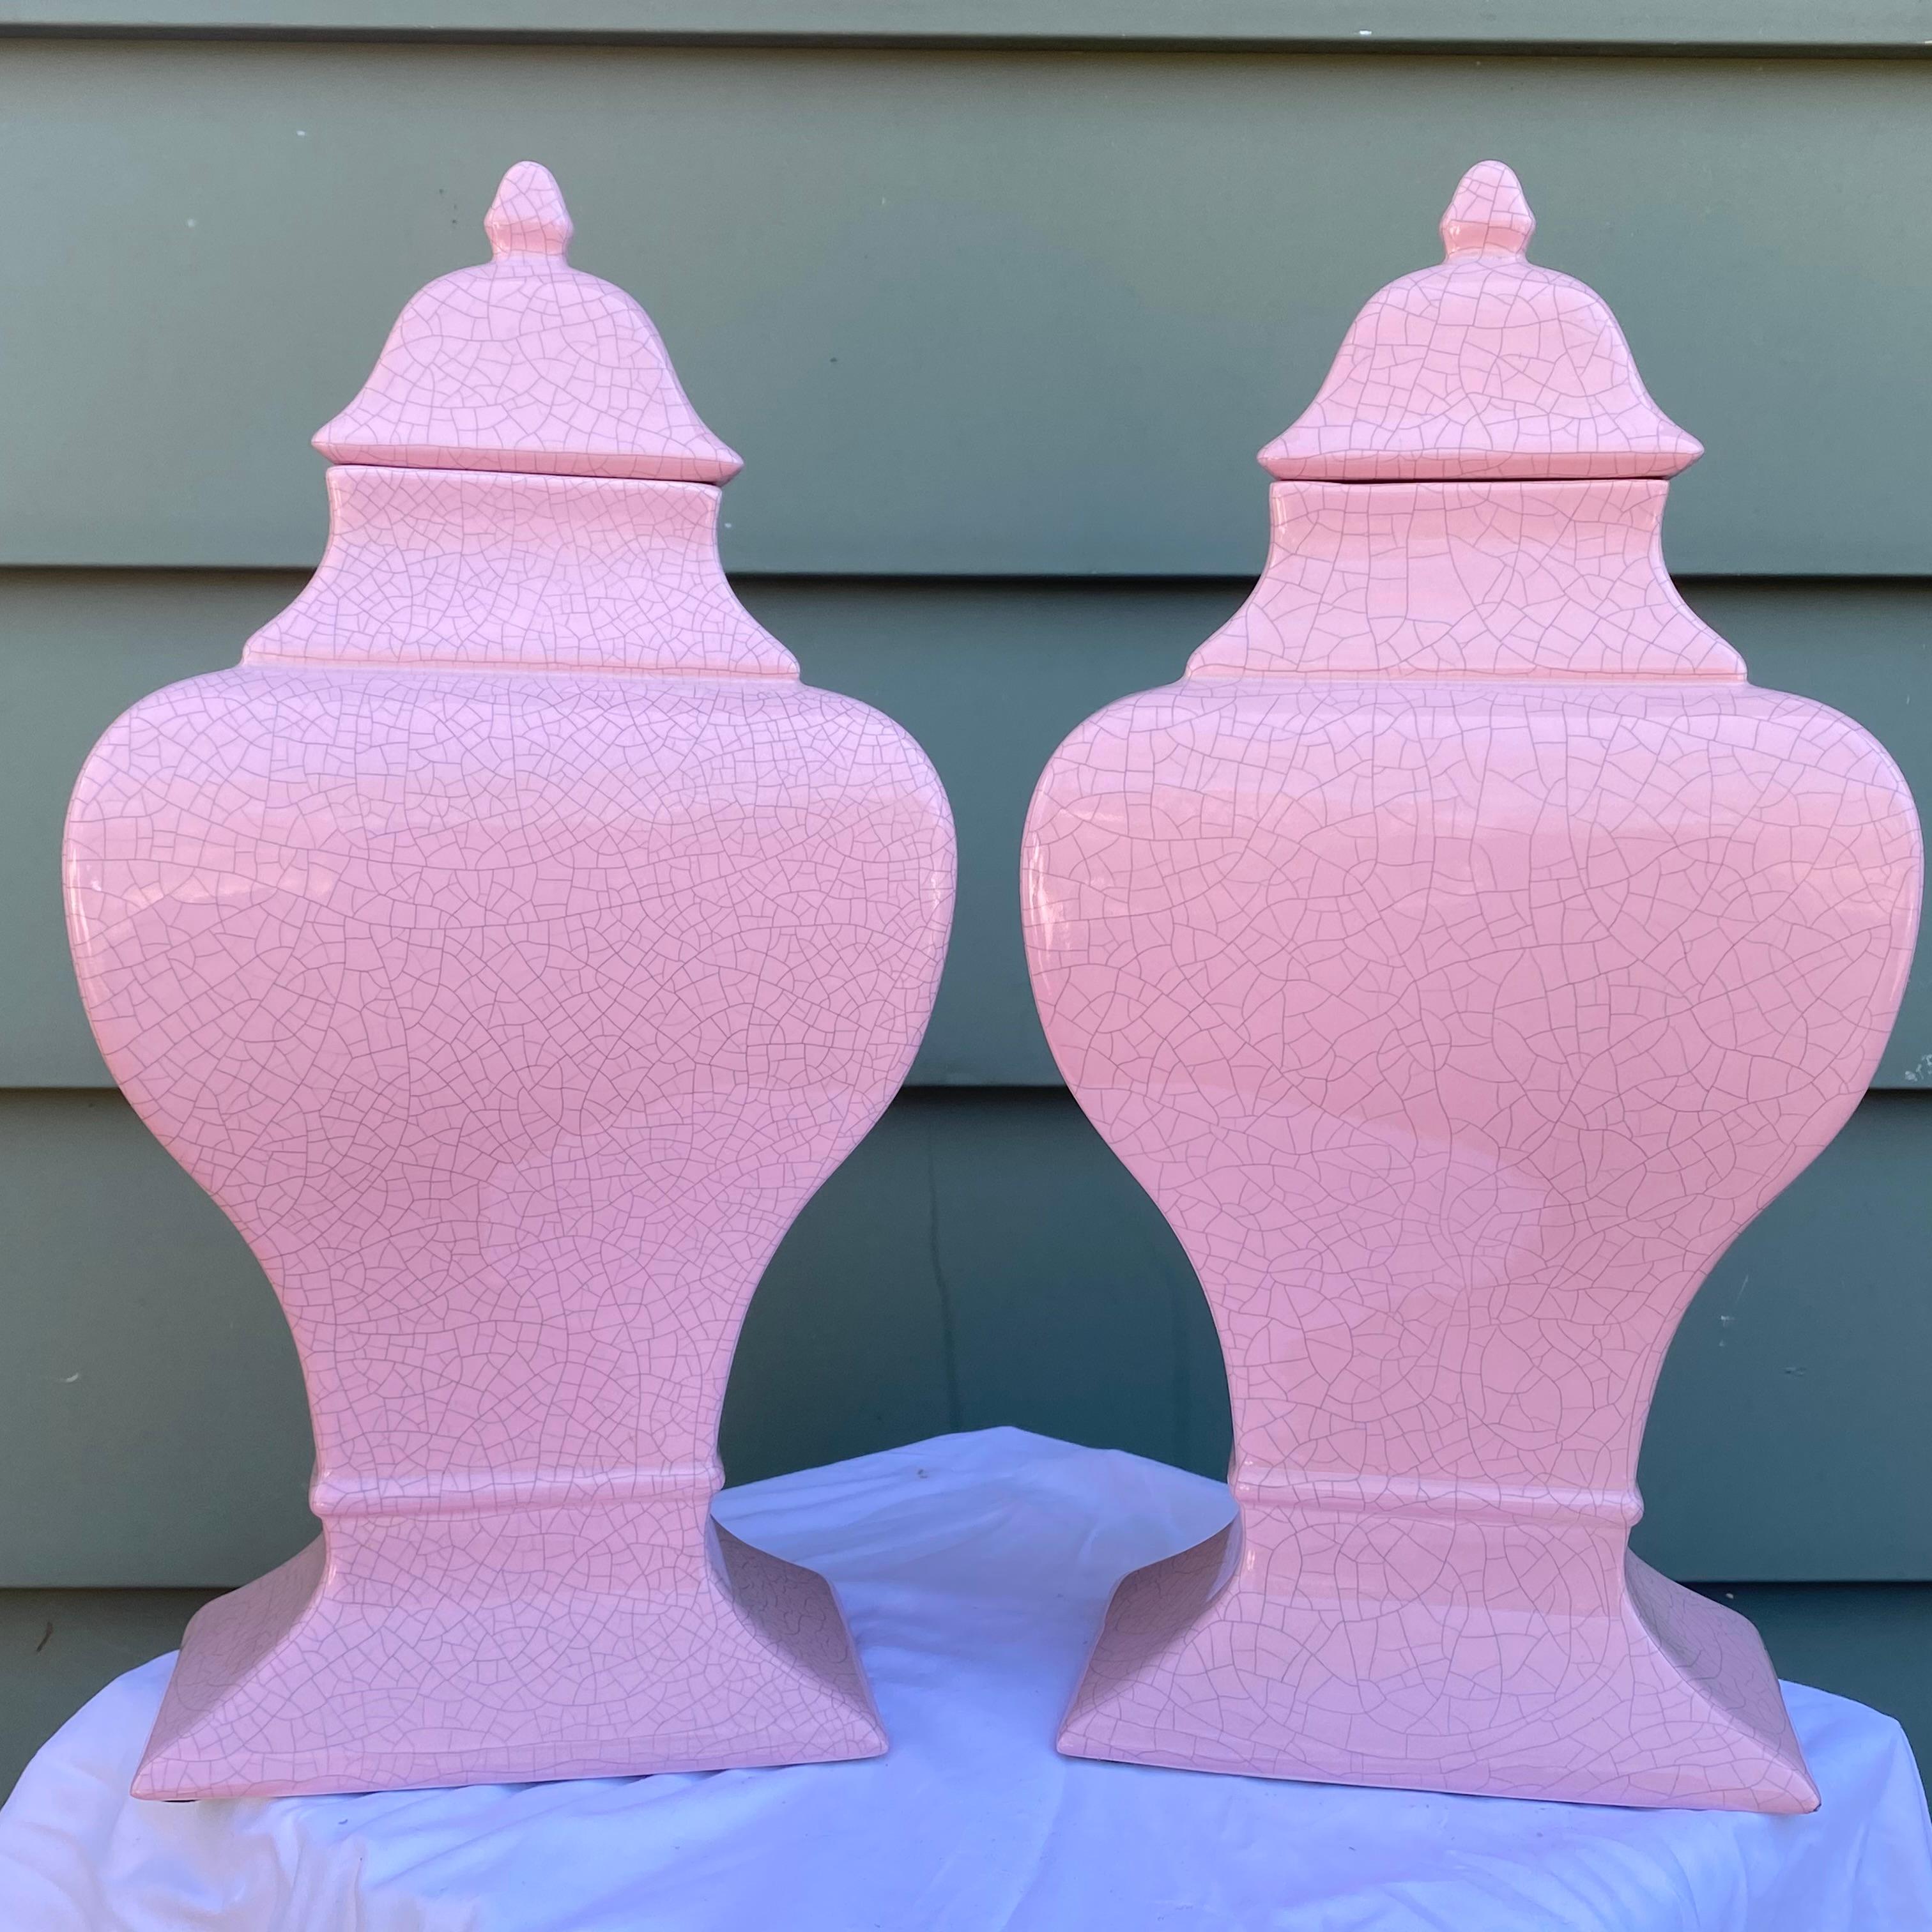 A fantastic pair of artisan made ceramic lidded jars fired in a pink crackle glaze finish by the California pottery company Jaru.